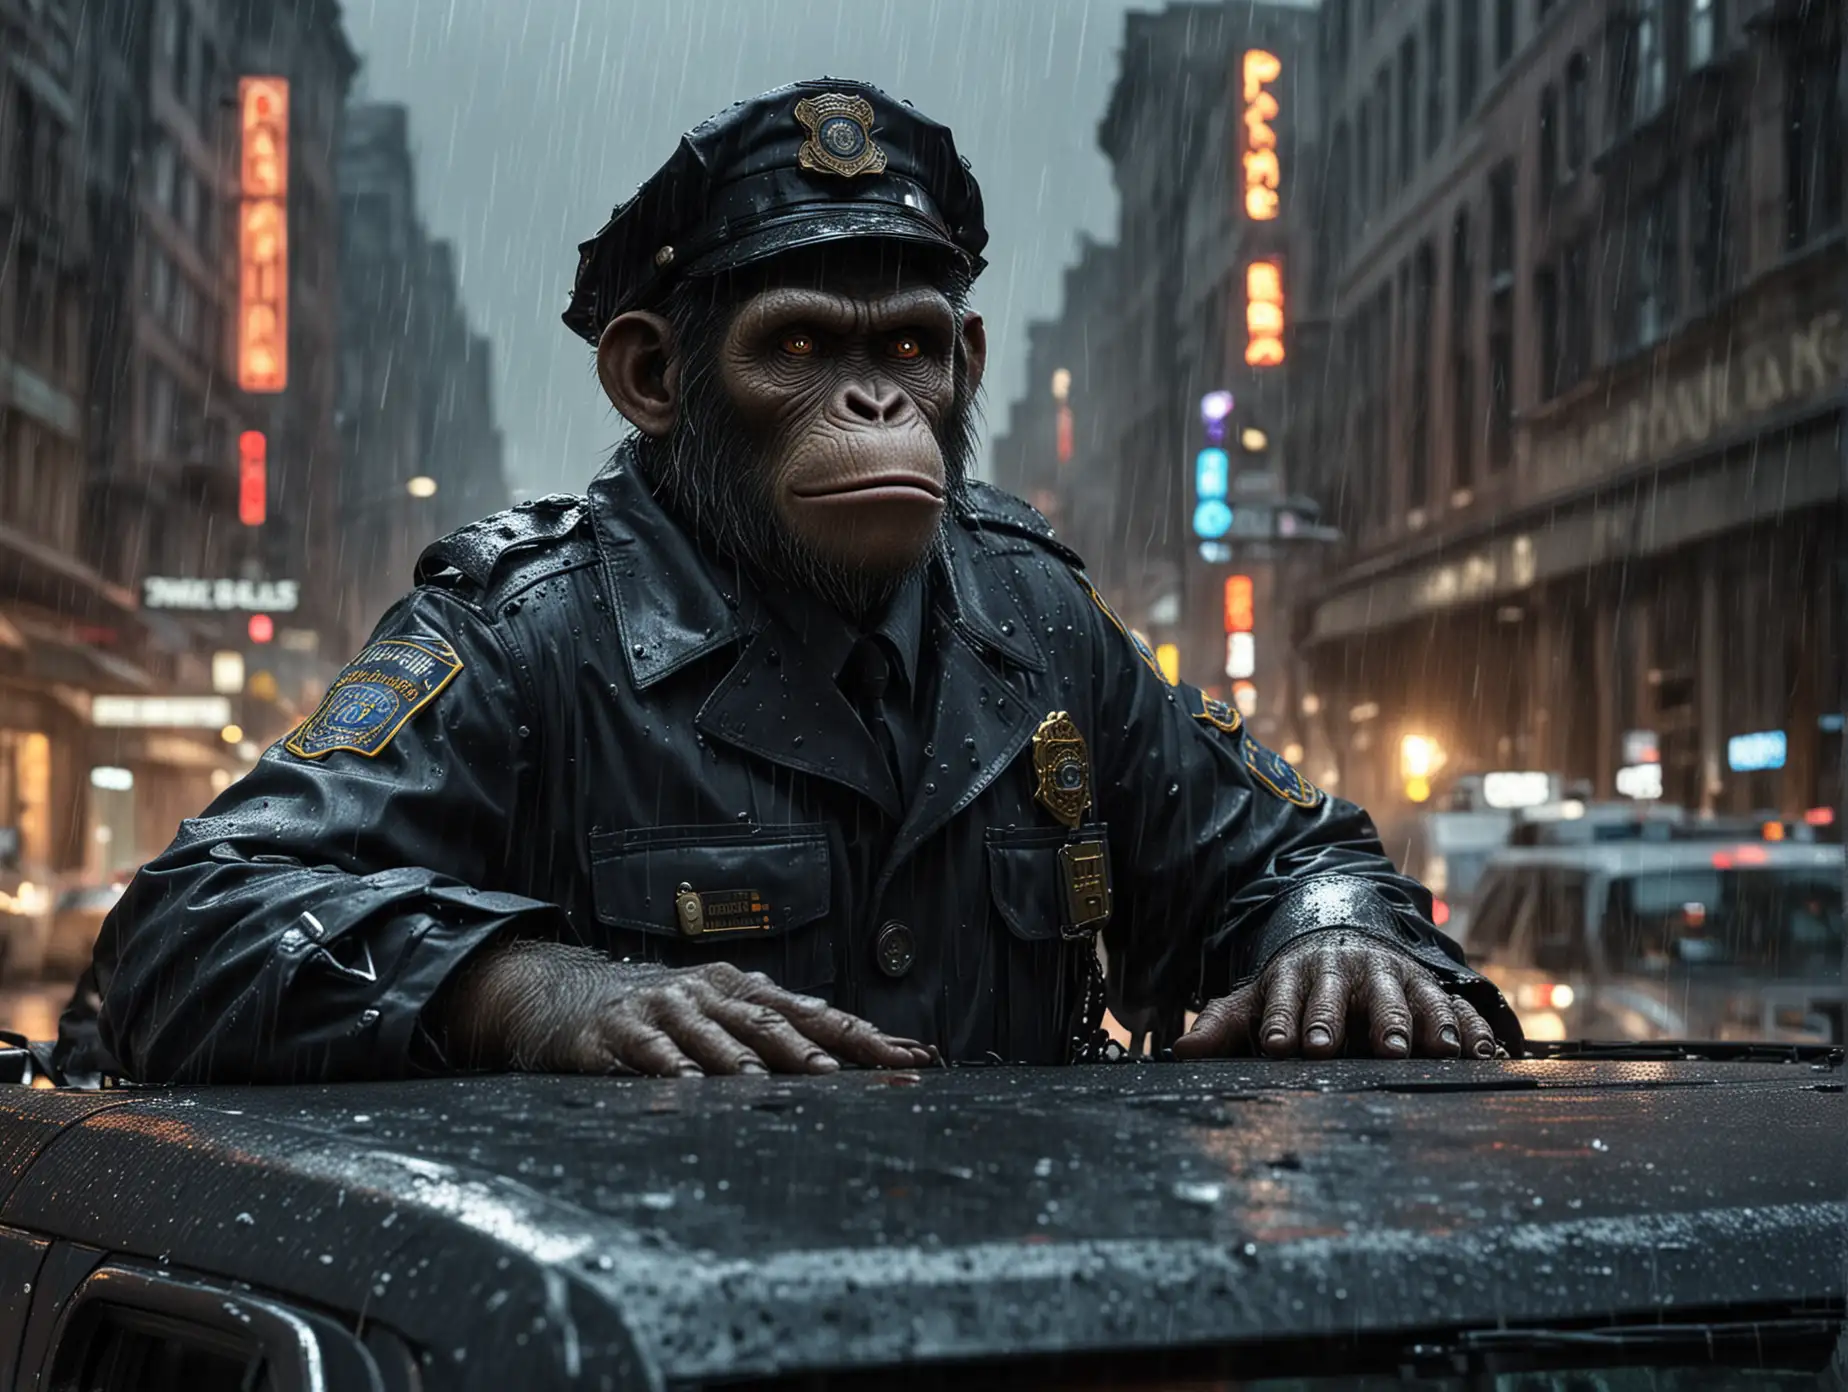 Imagine a scene set in Gotham City, featuring a humanoid ape police officer amidst the nocturnal urban landscape. Dressed in a standard police uniform, complete with a weathered trench coat and a police cap, the humanoid ape exudes authority and determination. With an earpiece for radio communication in place, the ape officer sits inside a police car, rain droplets trickling down the windshield. Against the backdrop of Gotham's rain-soaked streets, illuminated by neon lights, the humanoid ape police officer's keen eyes scan the surroundings, ready to respond to any call or chase down criminals lurking in the shadows.